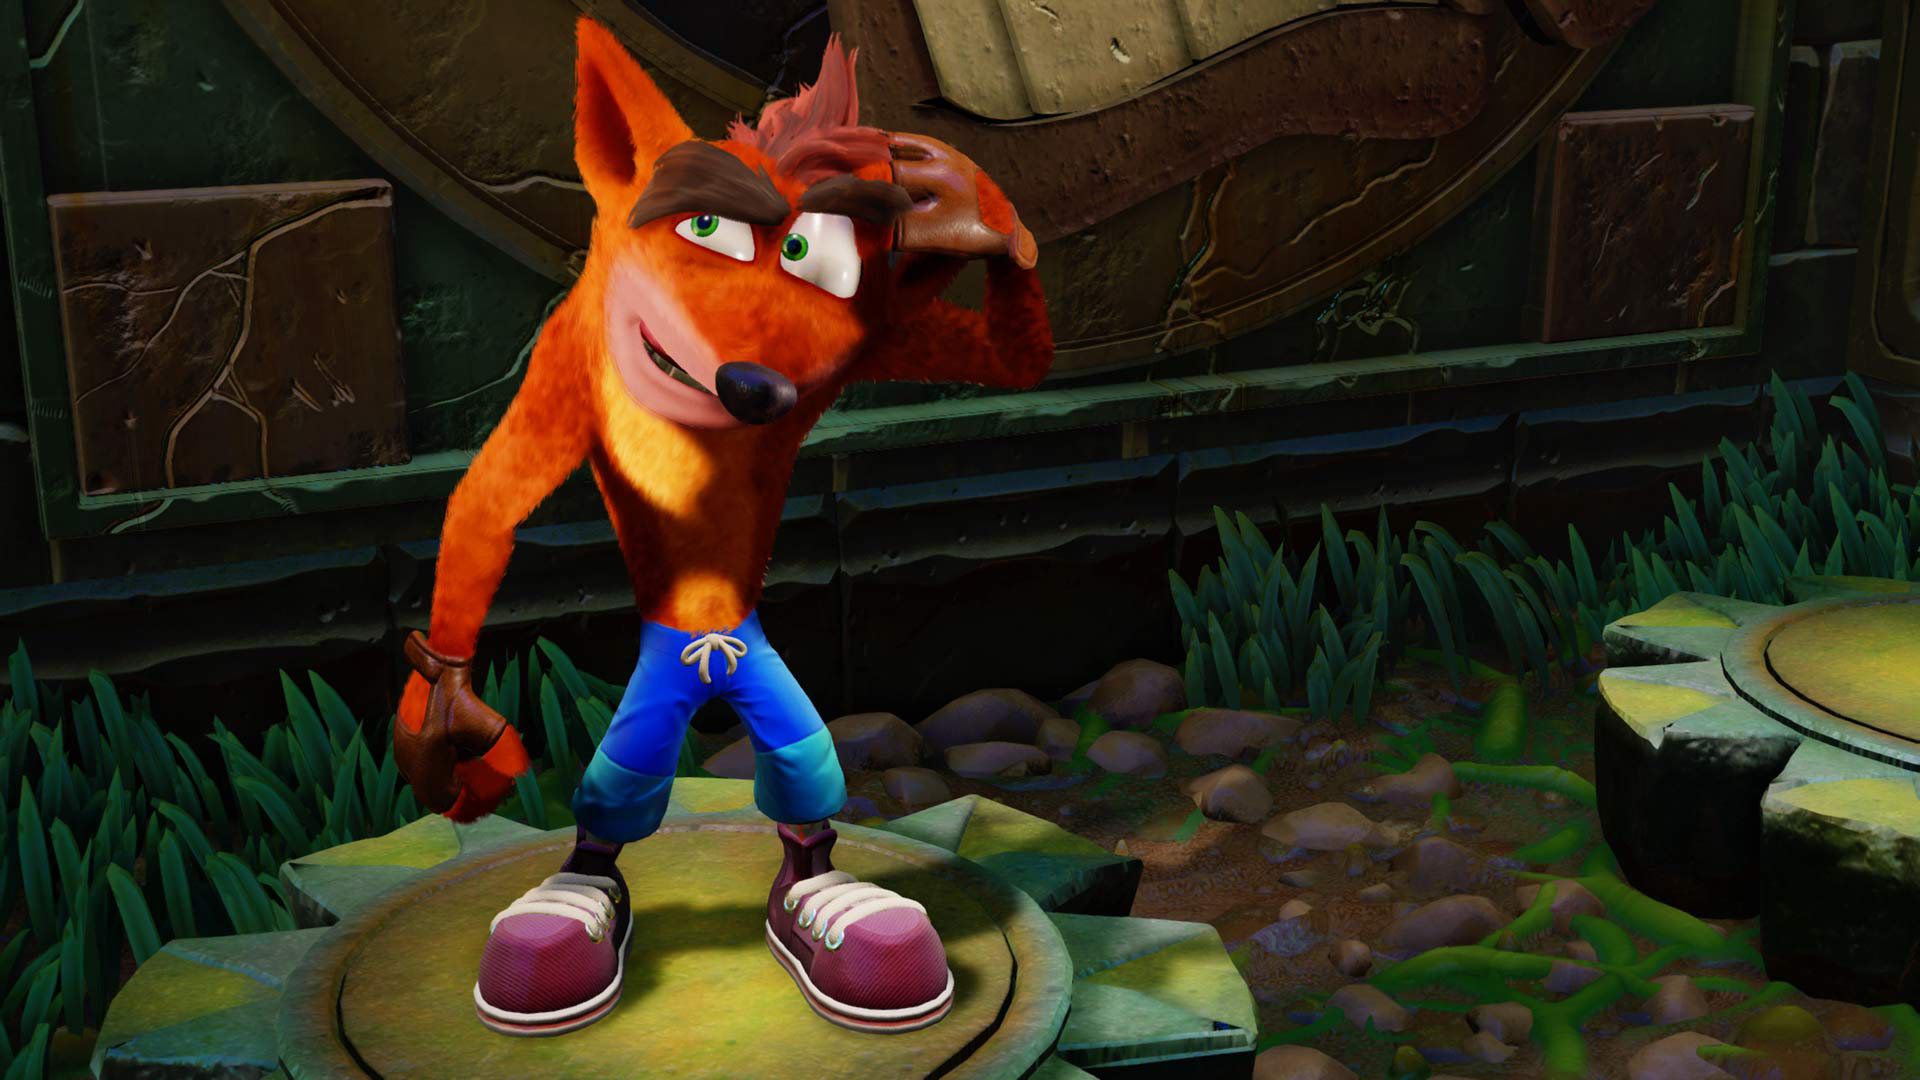 First 4 Figures Making Statues Based On Classic Crash Bandicoot